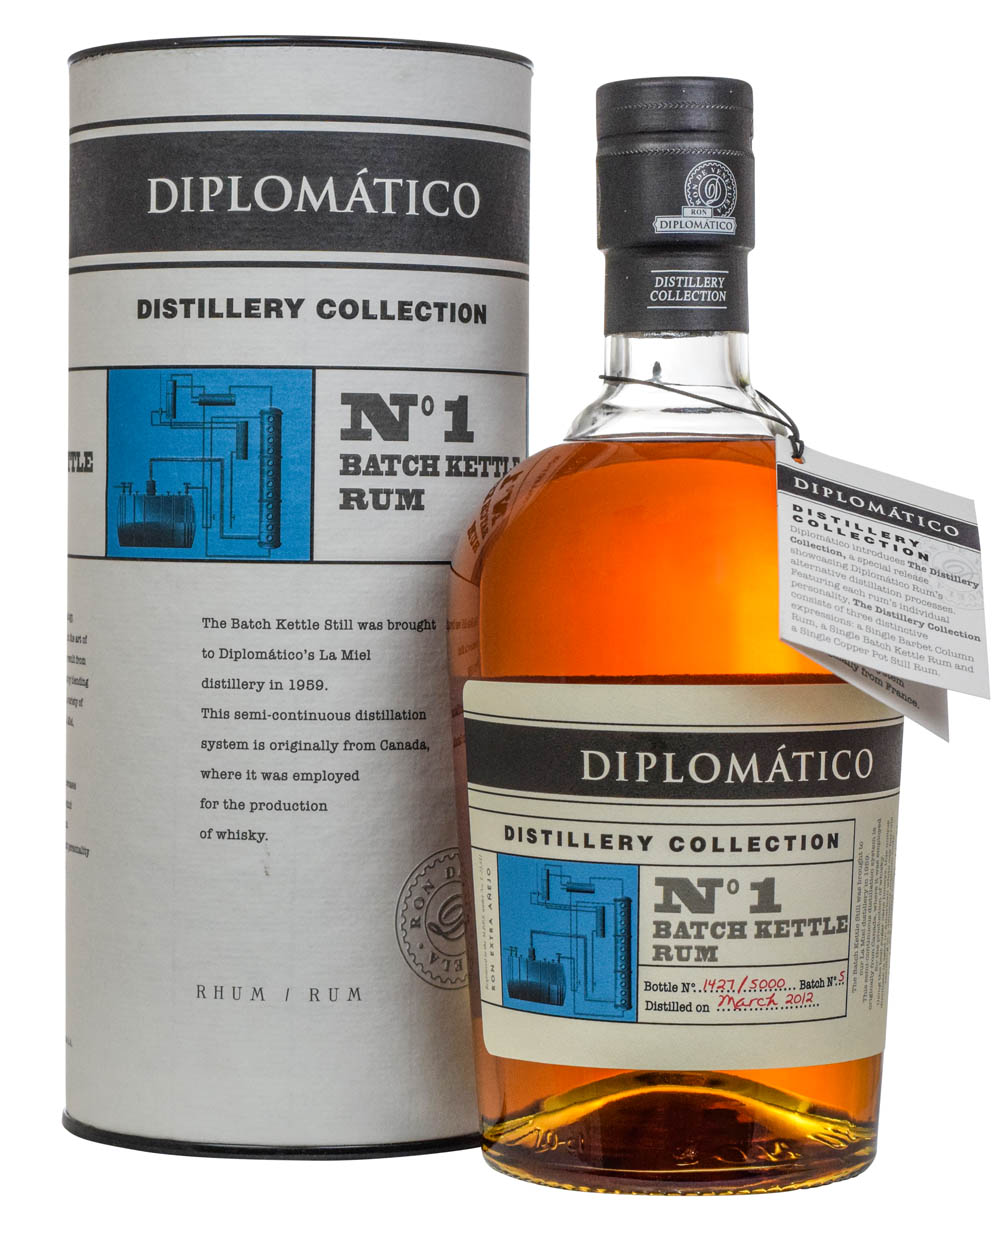 Diplomatico Distillery Collection No1 Batch Kettle Rum Tube Must Have Malts MHM